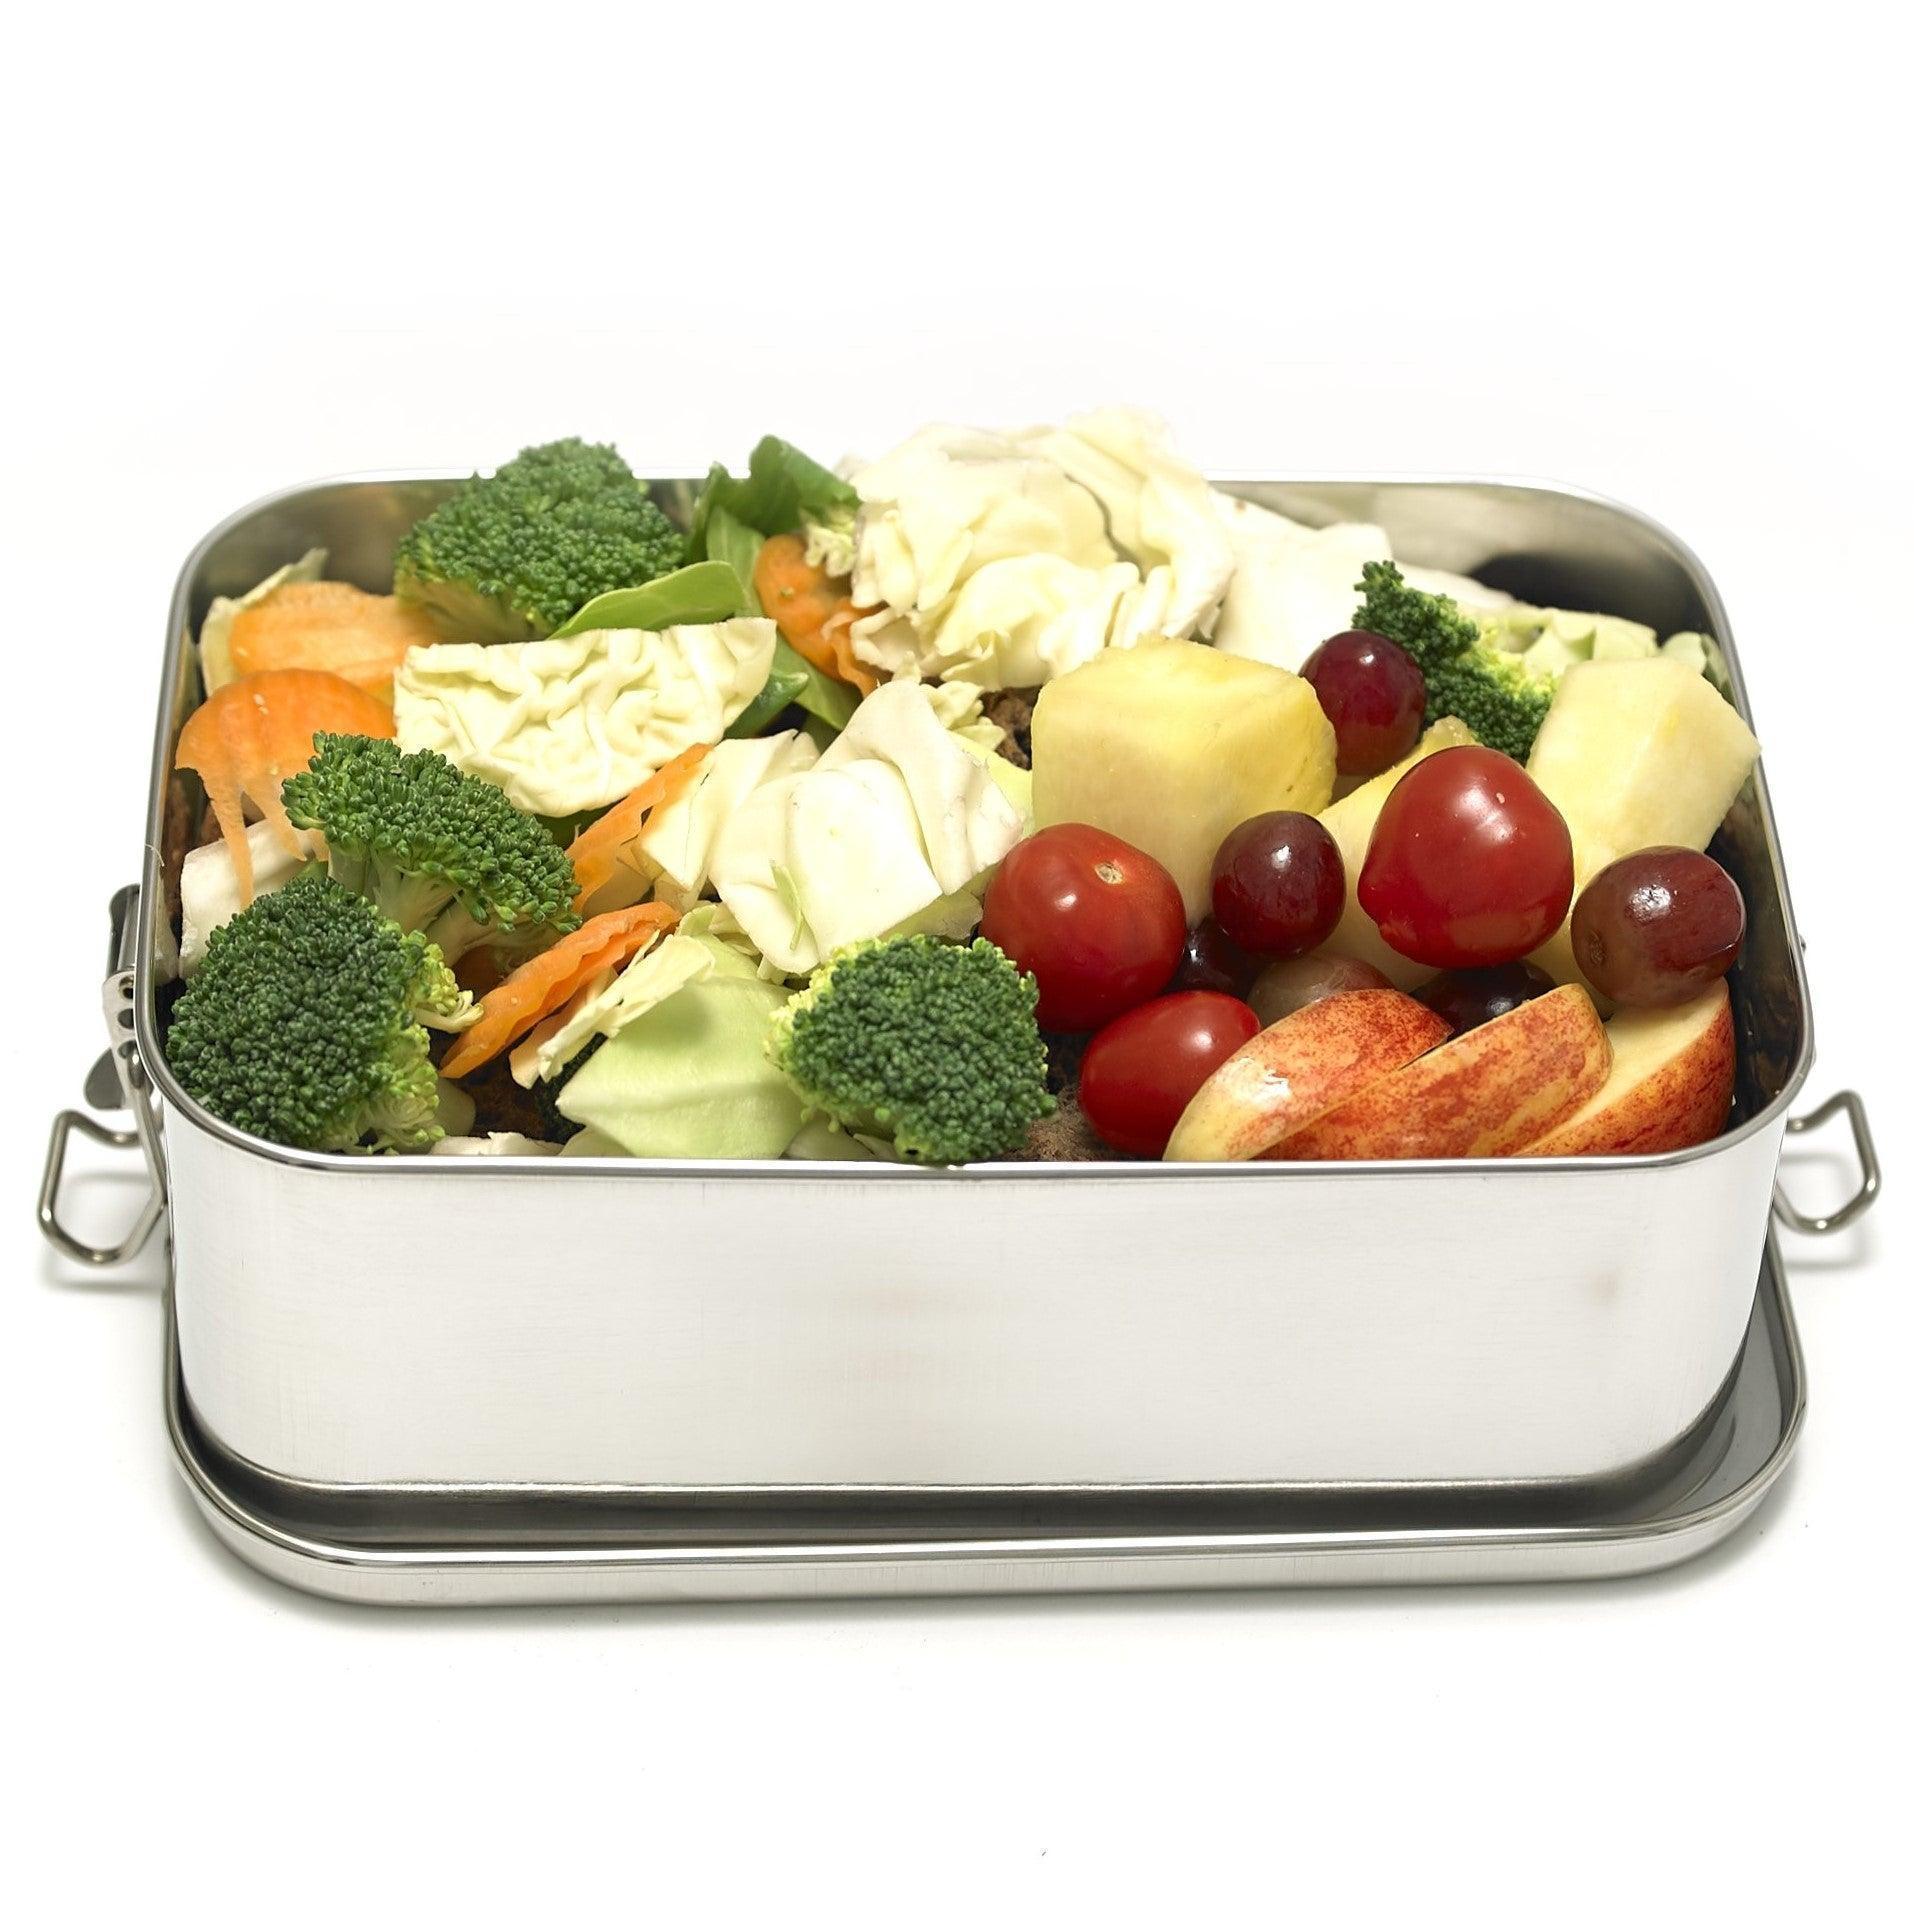 Large Leakproof Rectangular Lunch Box | Stainless Steel - Meals In Steel